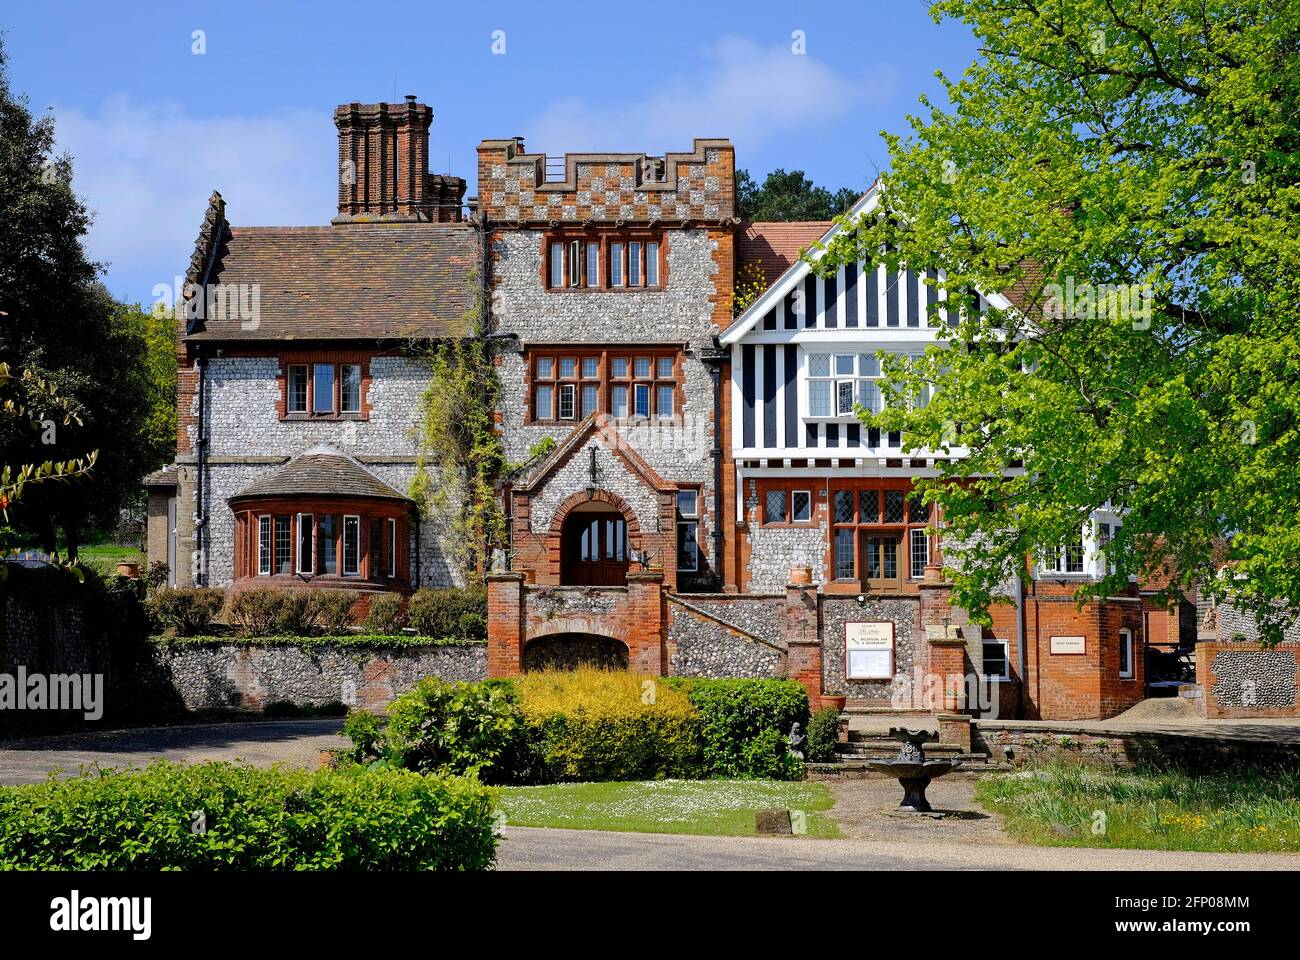 dales country house hotel, upper sheringham, north norfolk, inghilterra Foto Stock